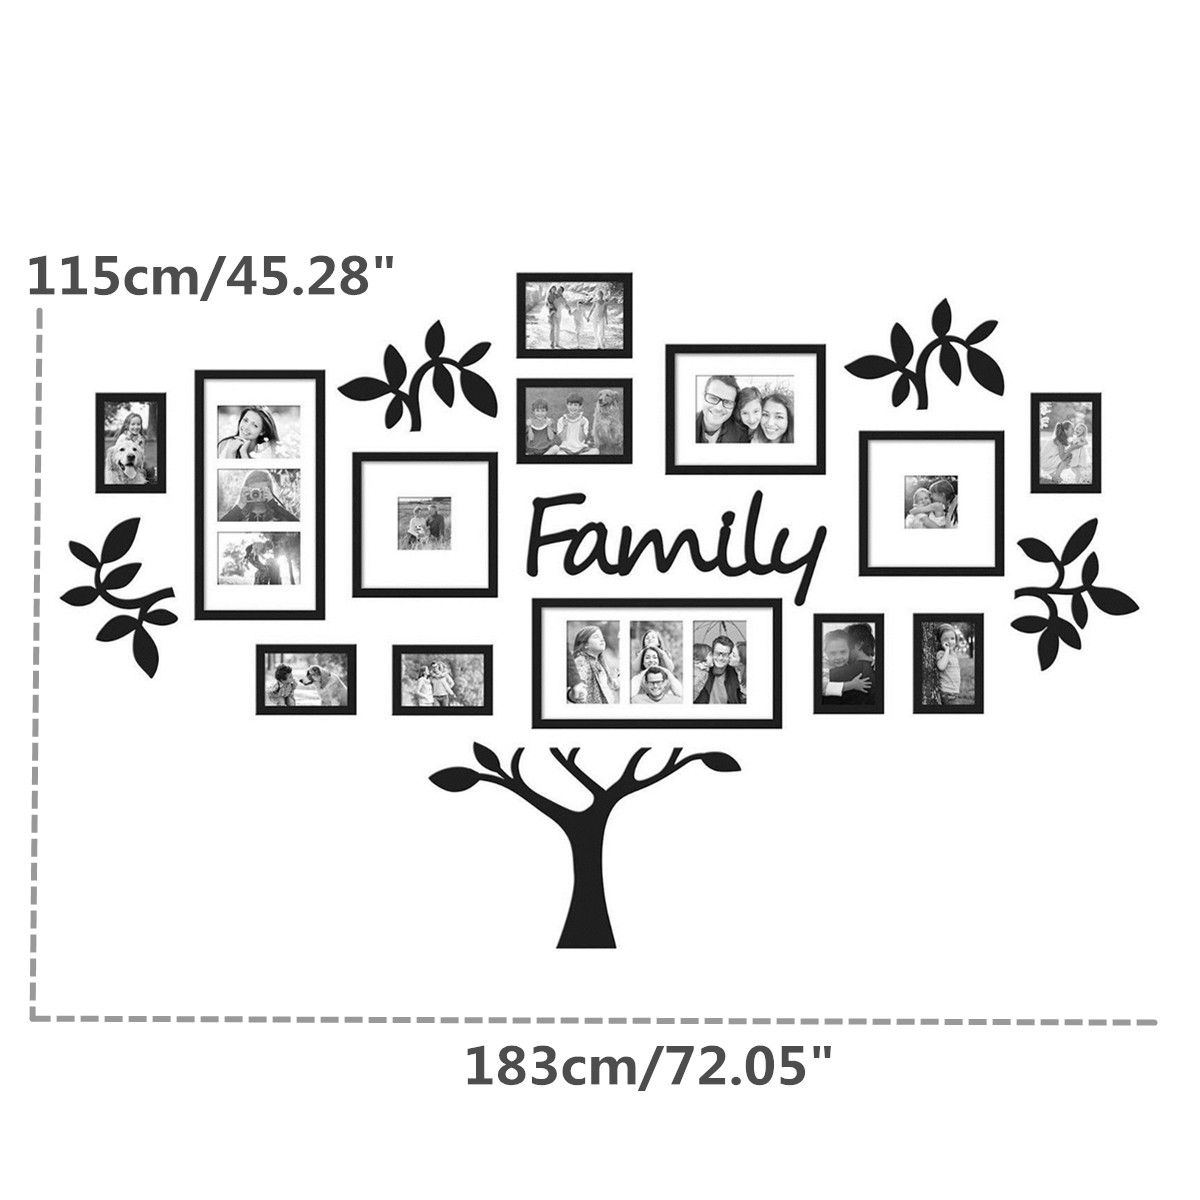 Acryli-Photo-Frame-Family-Tree-Picture-Collage-Wall-Art-Hanging-Sticker-Home-Decor-1520788